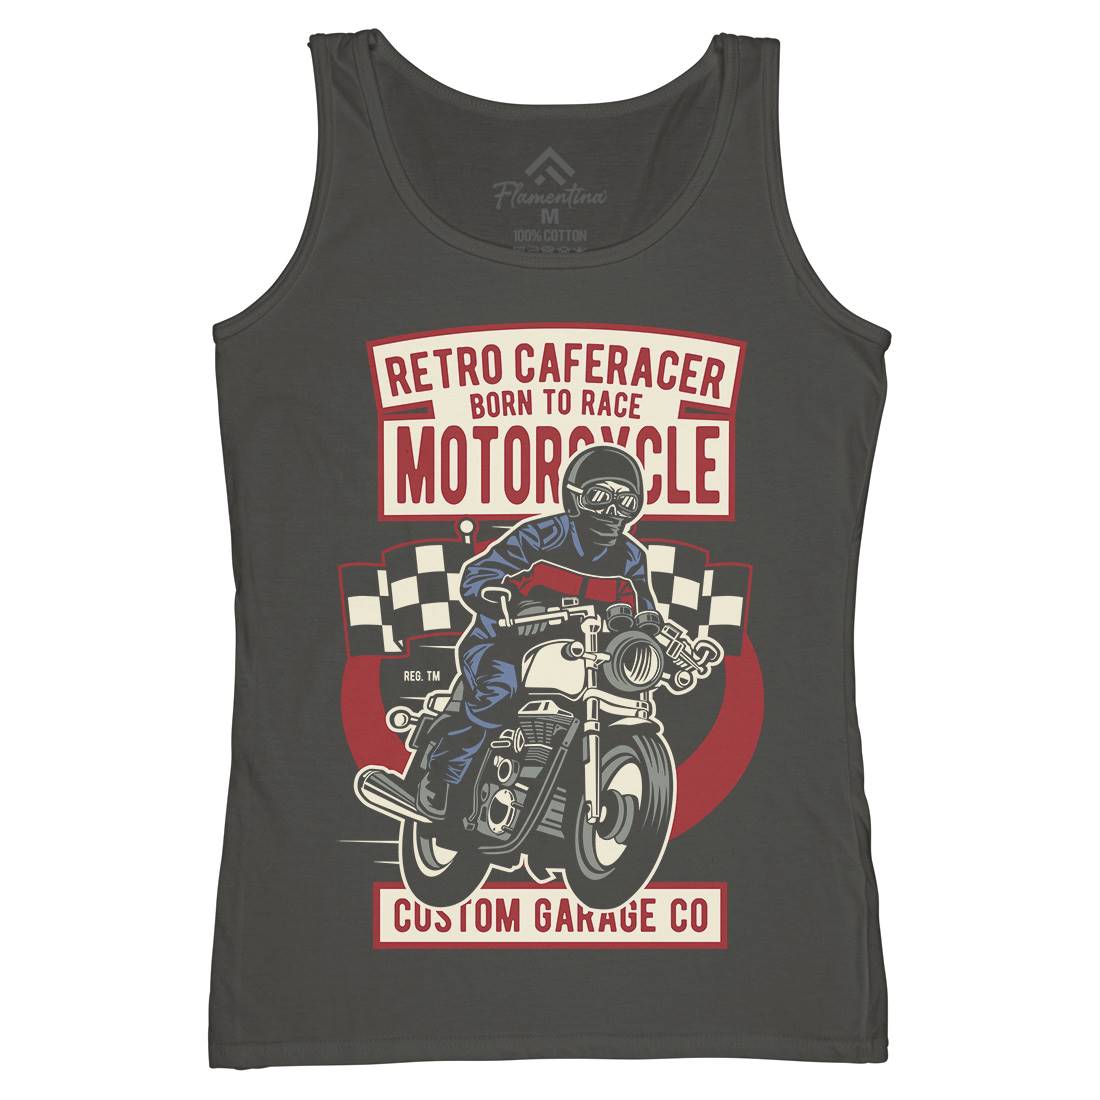 Retro Caferacer Womens Organic Tank Top Vest Motorcycles D563